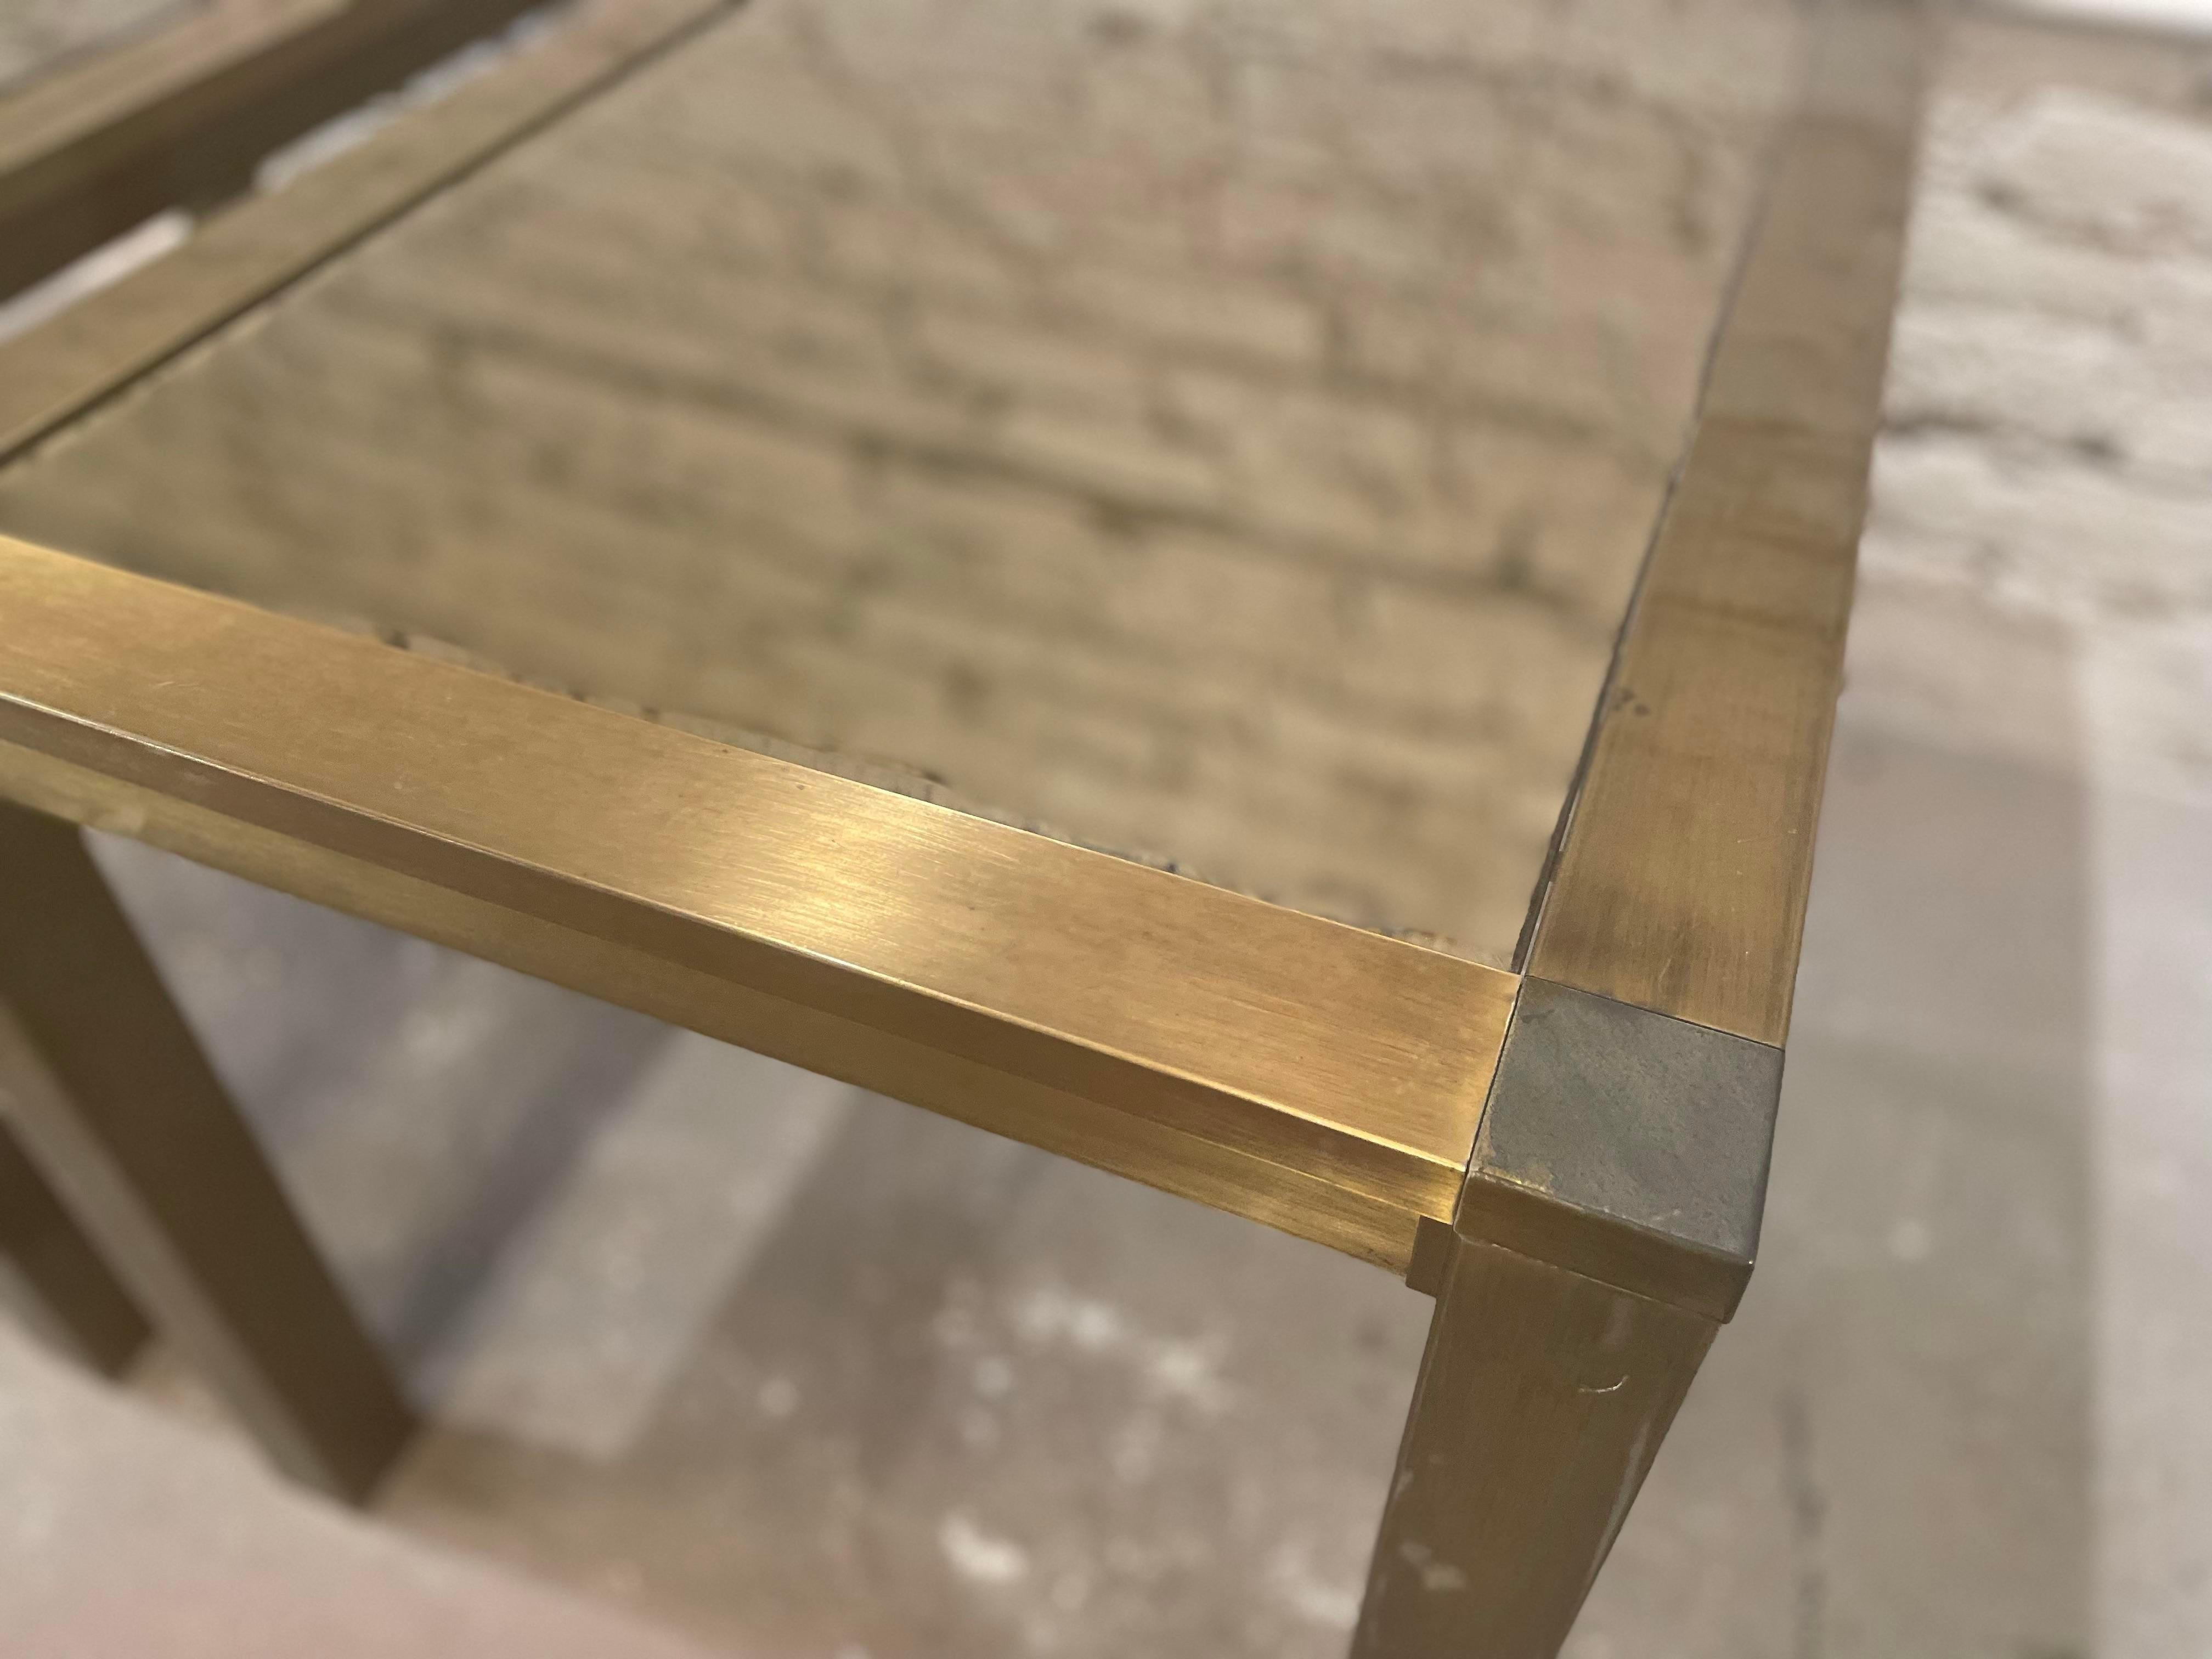 Beautiful vintage pair of brushed brass side tables with mirrored glass top. These are in wonderful condition. Sturdy and chic.

DIMENSIONS: 30ʺW × 21.5ʺD × 21ʺH
STYLES: Art Deco, Hollywood Regency, Mid-Century Modern
TABLE SHAPE: Rectangle
PERIOD: